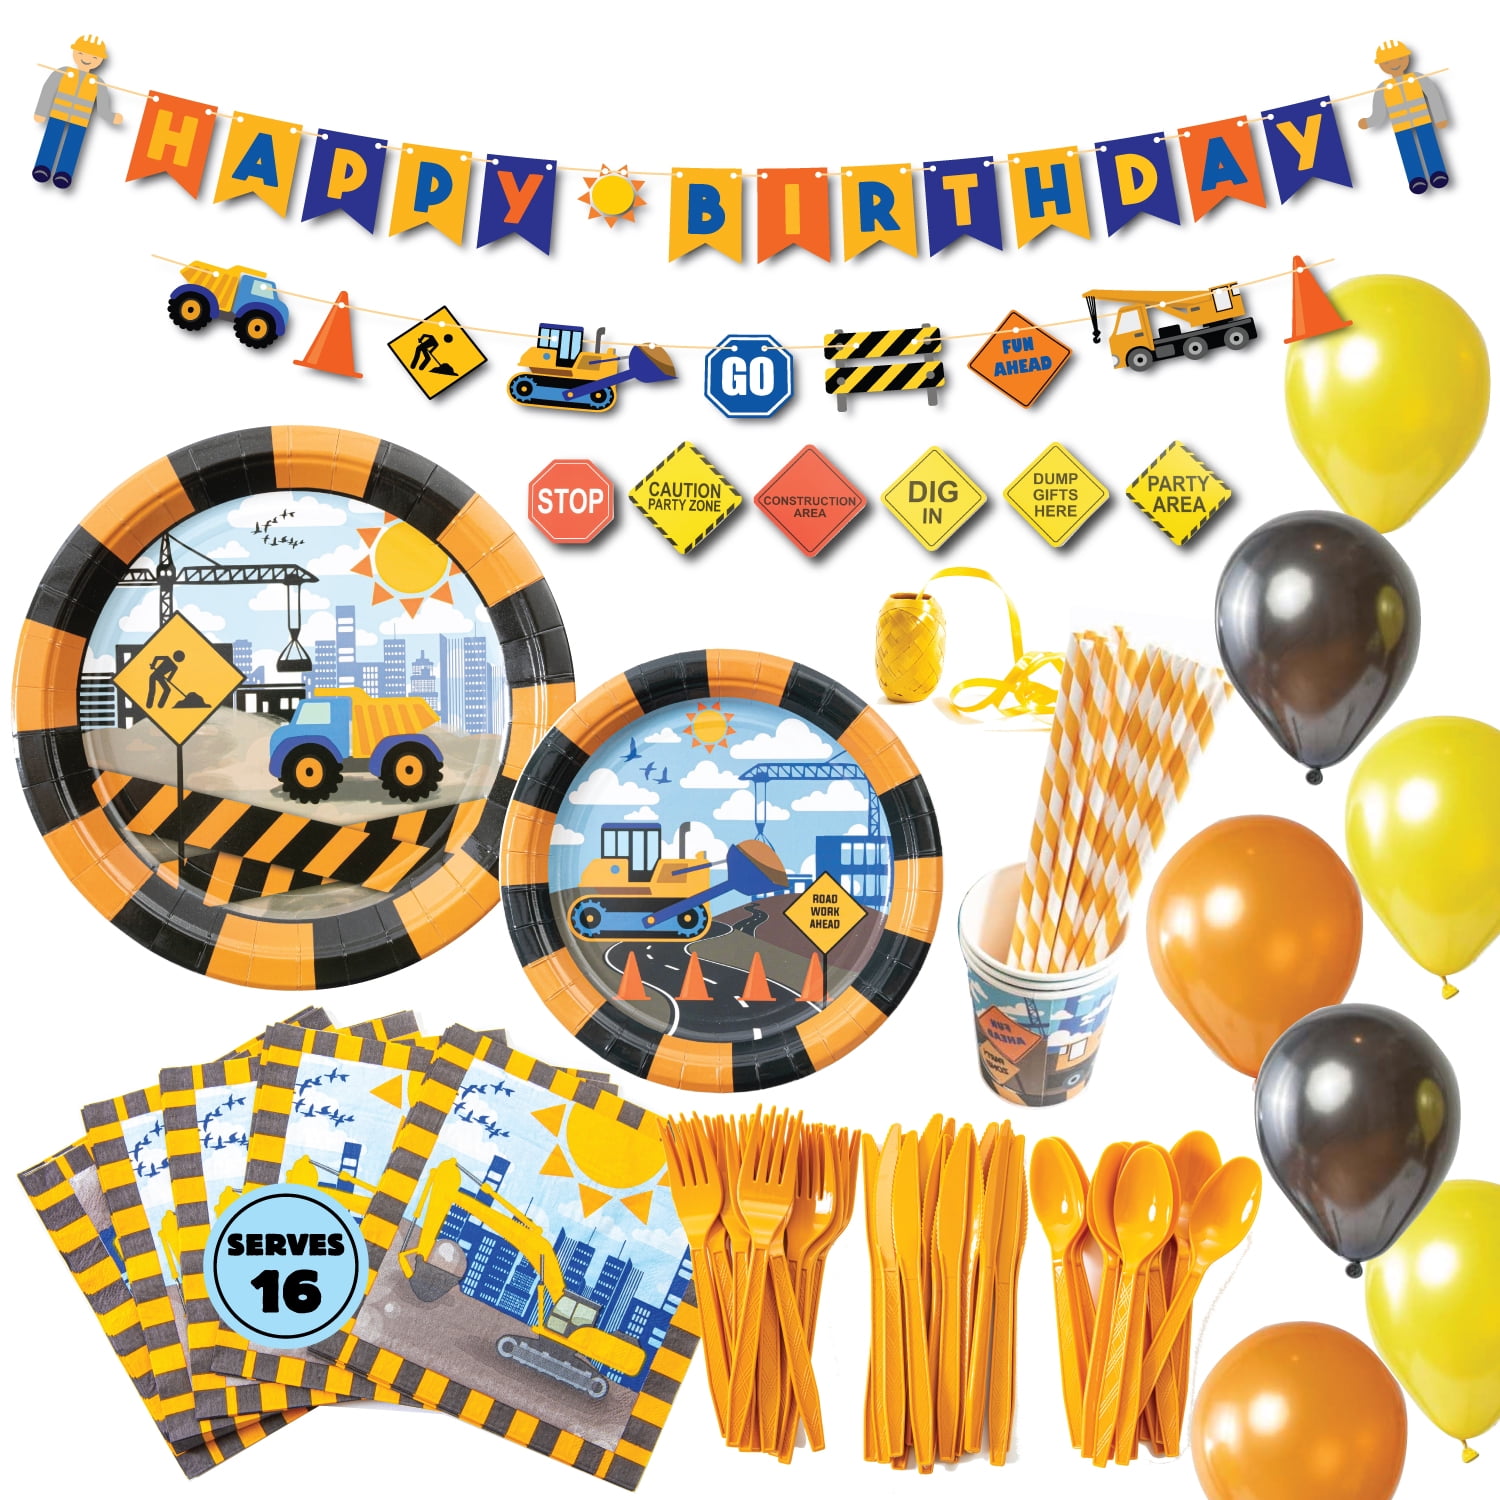 Cute 1st Birthday Boy Decorations One Little Star Boy Birthday Party Supplies Pack for 16 Guests 16 Cups 16 Beverage Napkins 24 Paper Straws 16 Dessert Plates and 1 Table Cover 